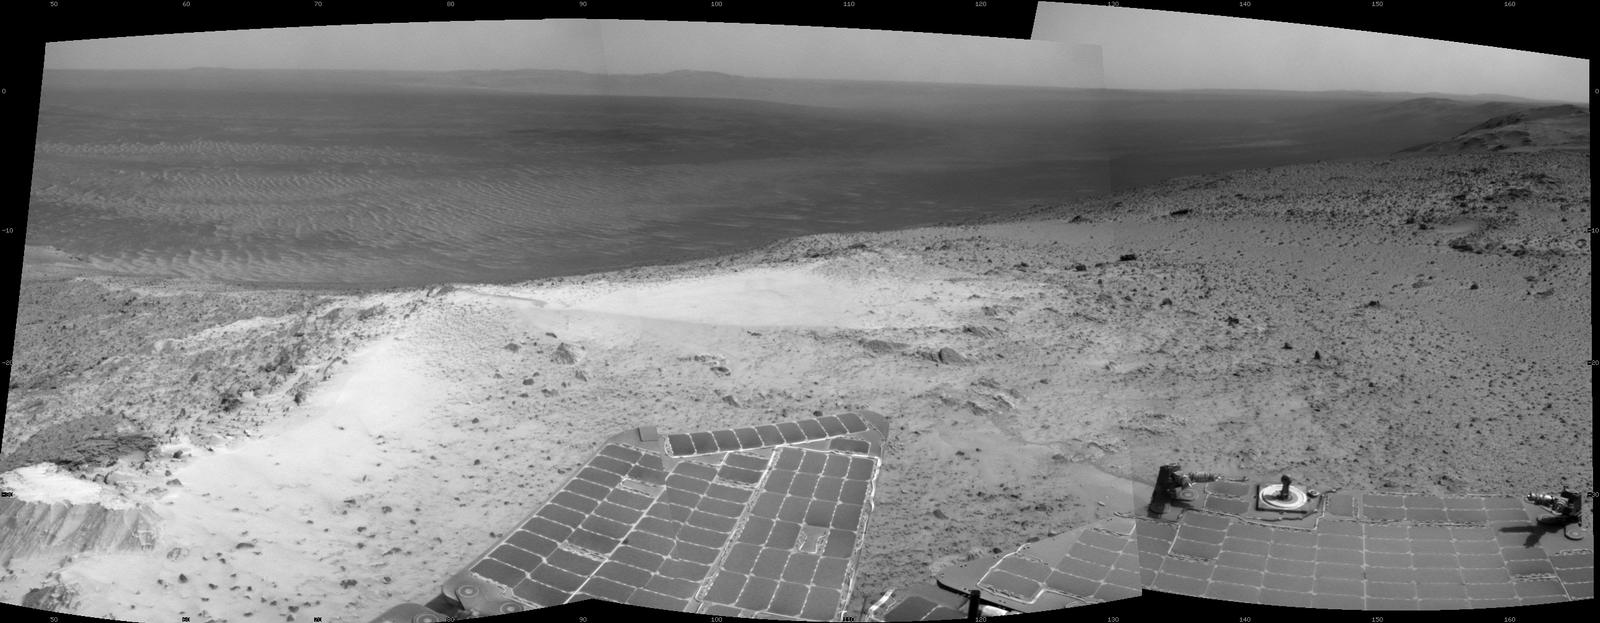 Opportunity's View from Atop 'Cape Tribulation'